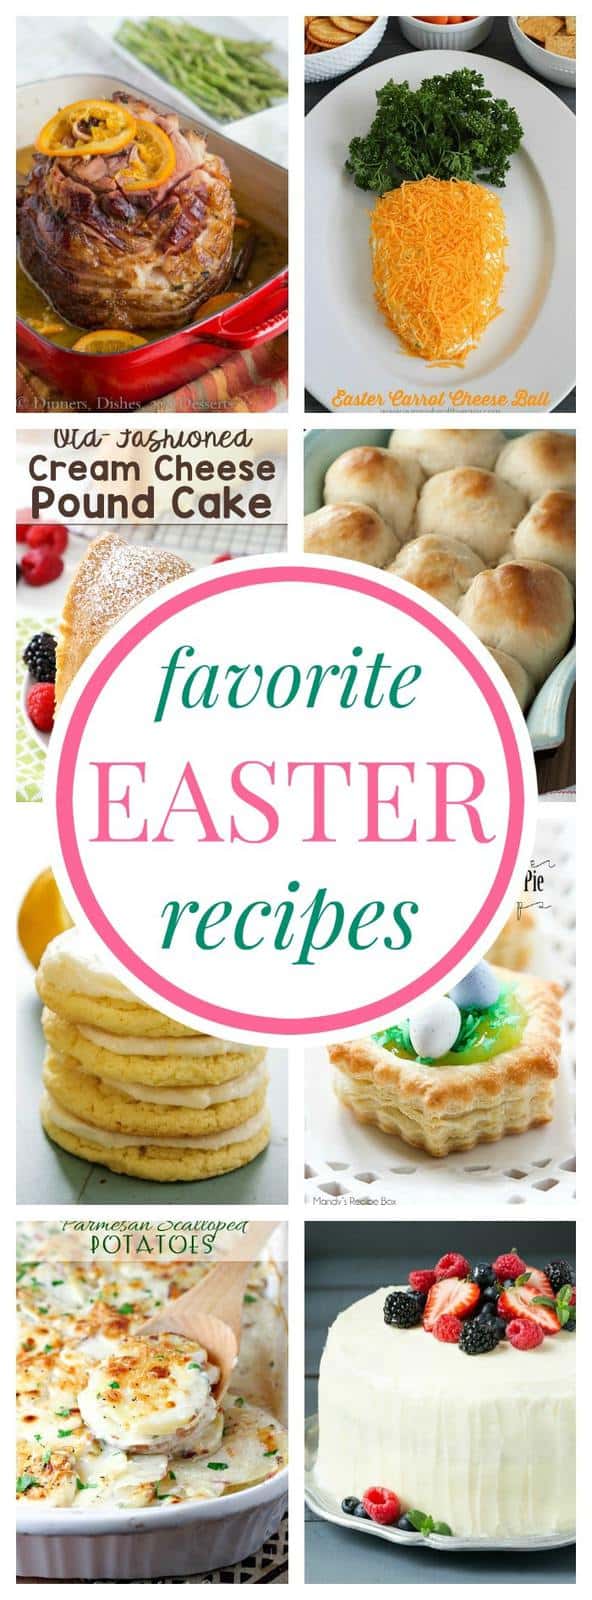 Favorite Easter Recipes - brunch, side dishes, spring desserts, and even an Easter ham for your holiday menu.